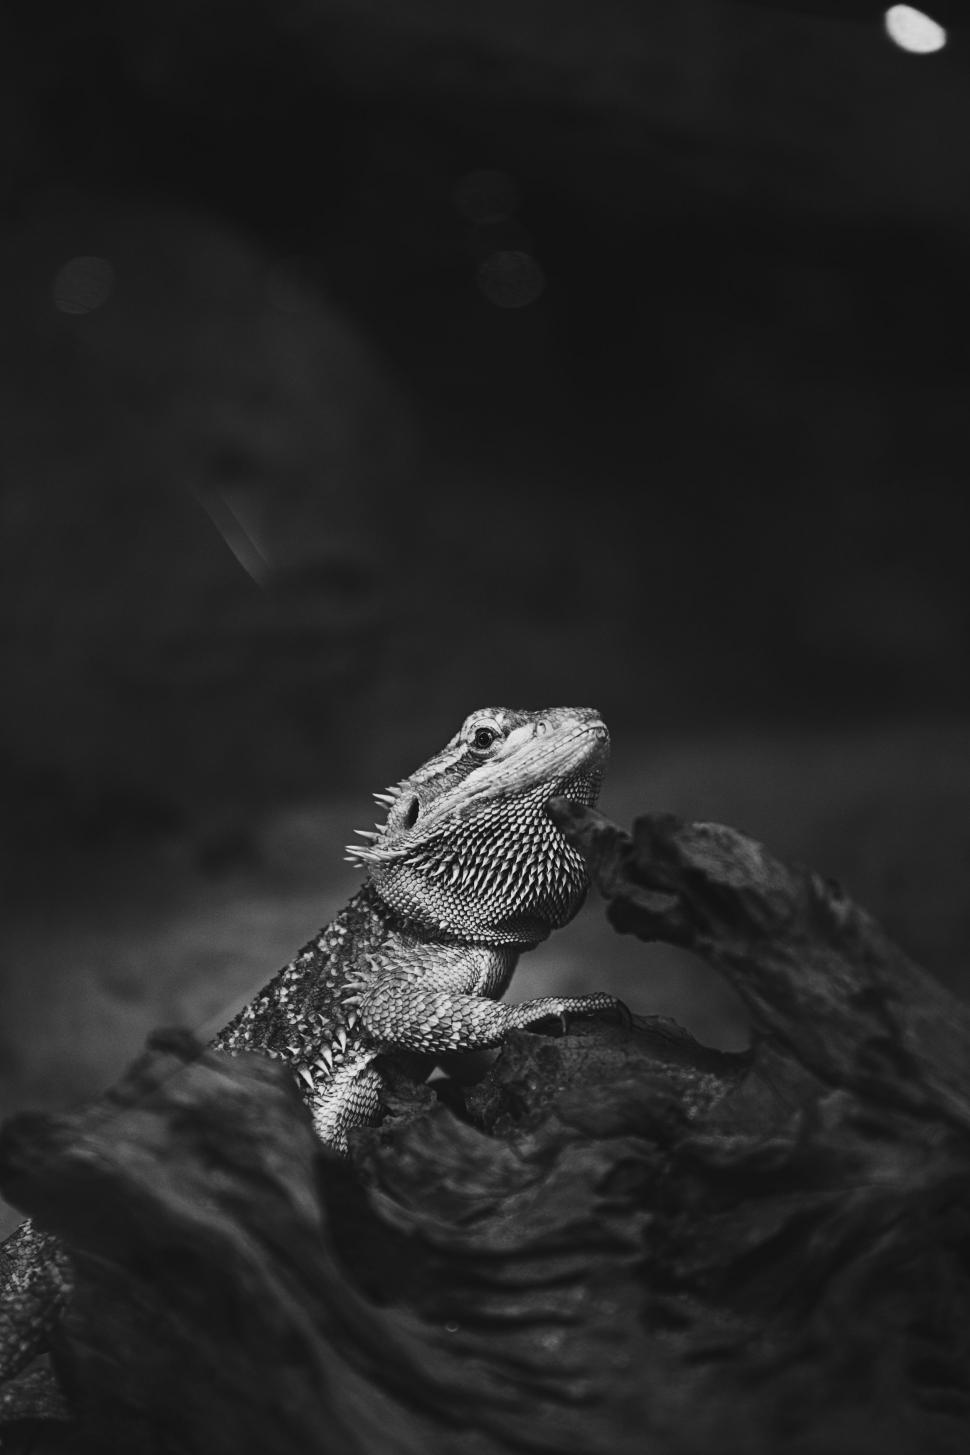 Free Image of Lizard Resting on Rock 